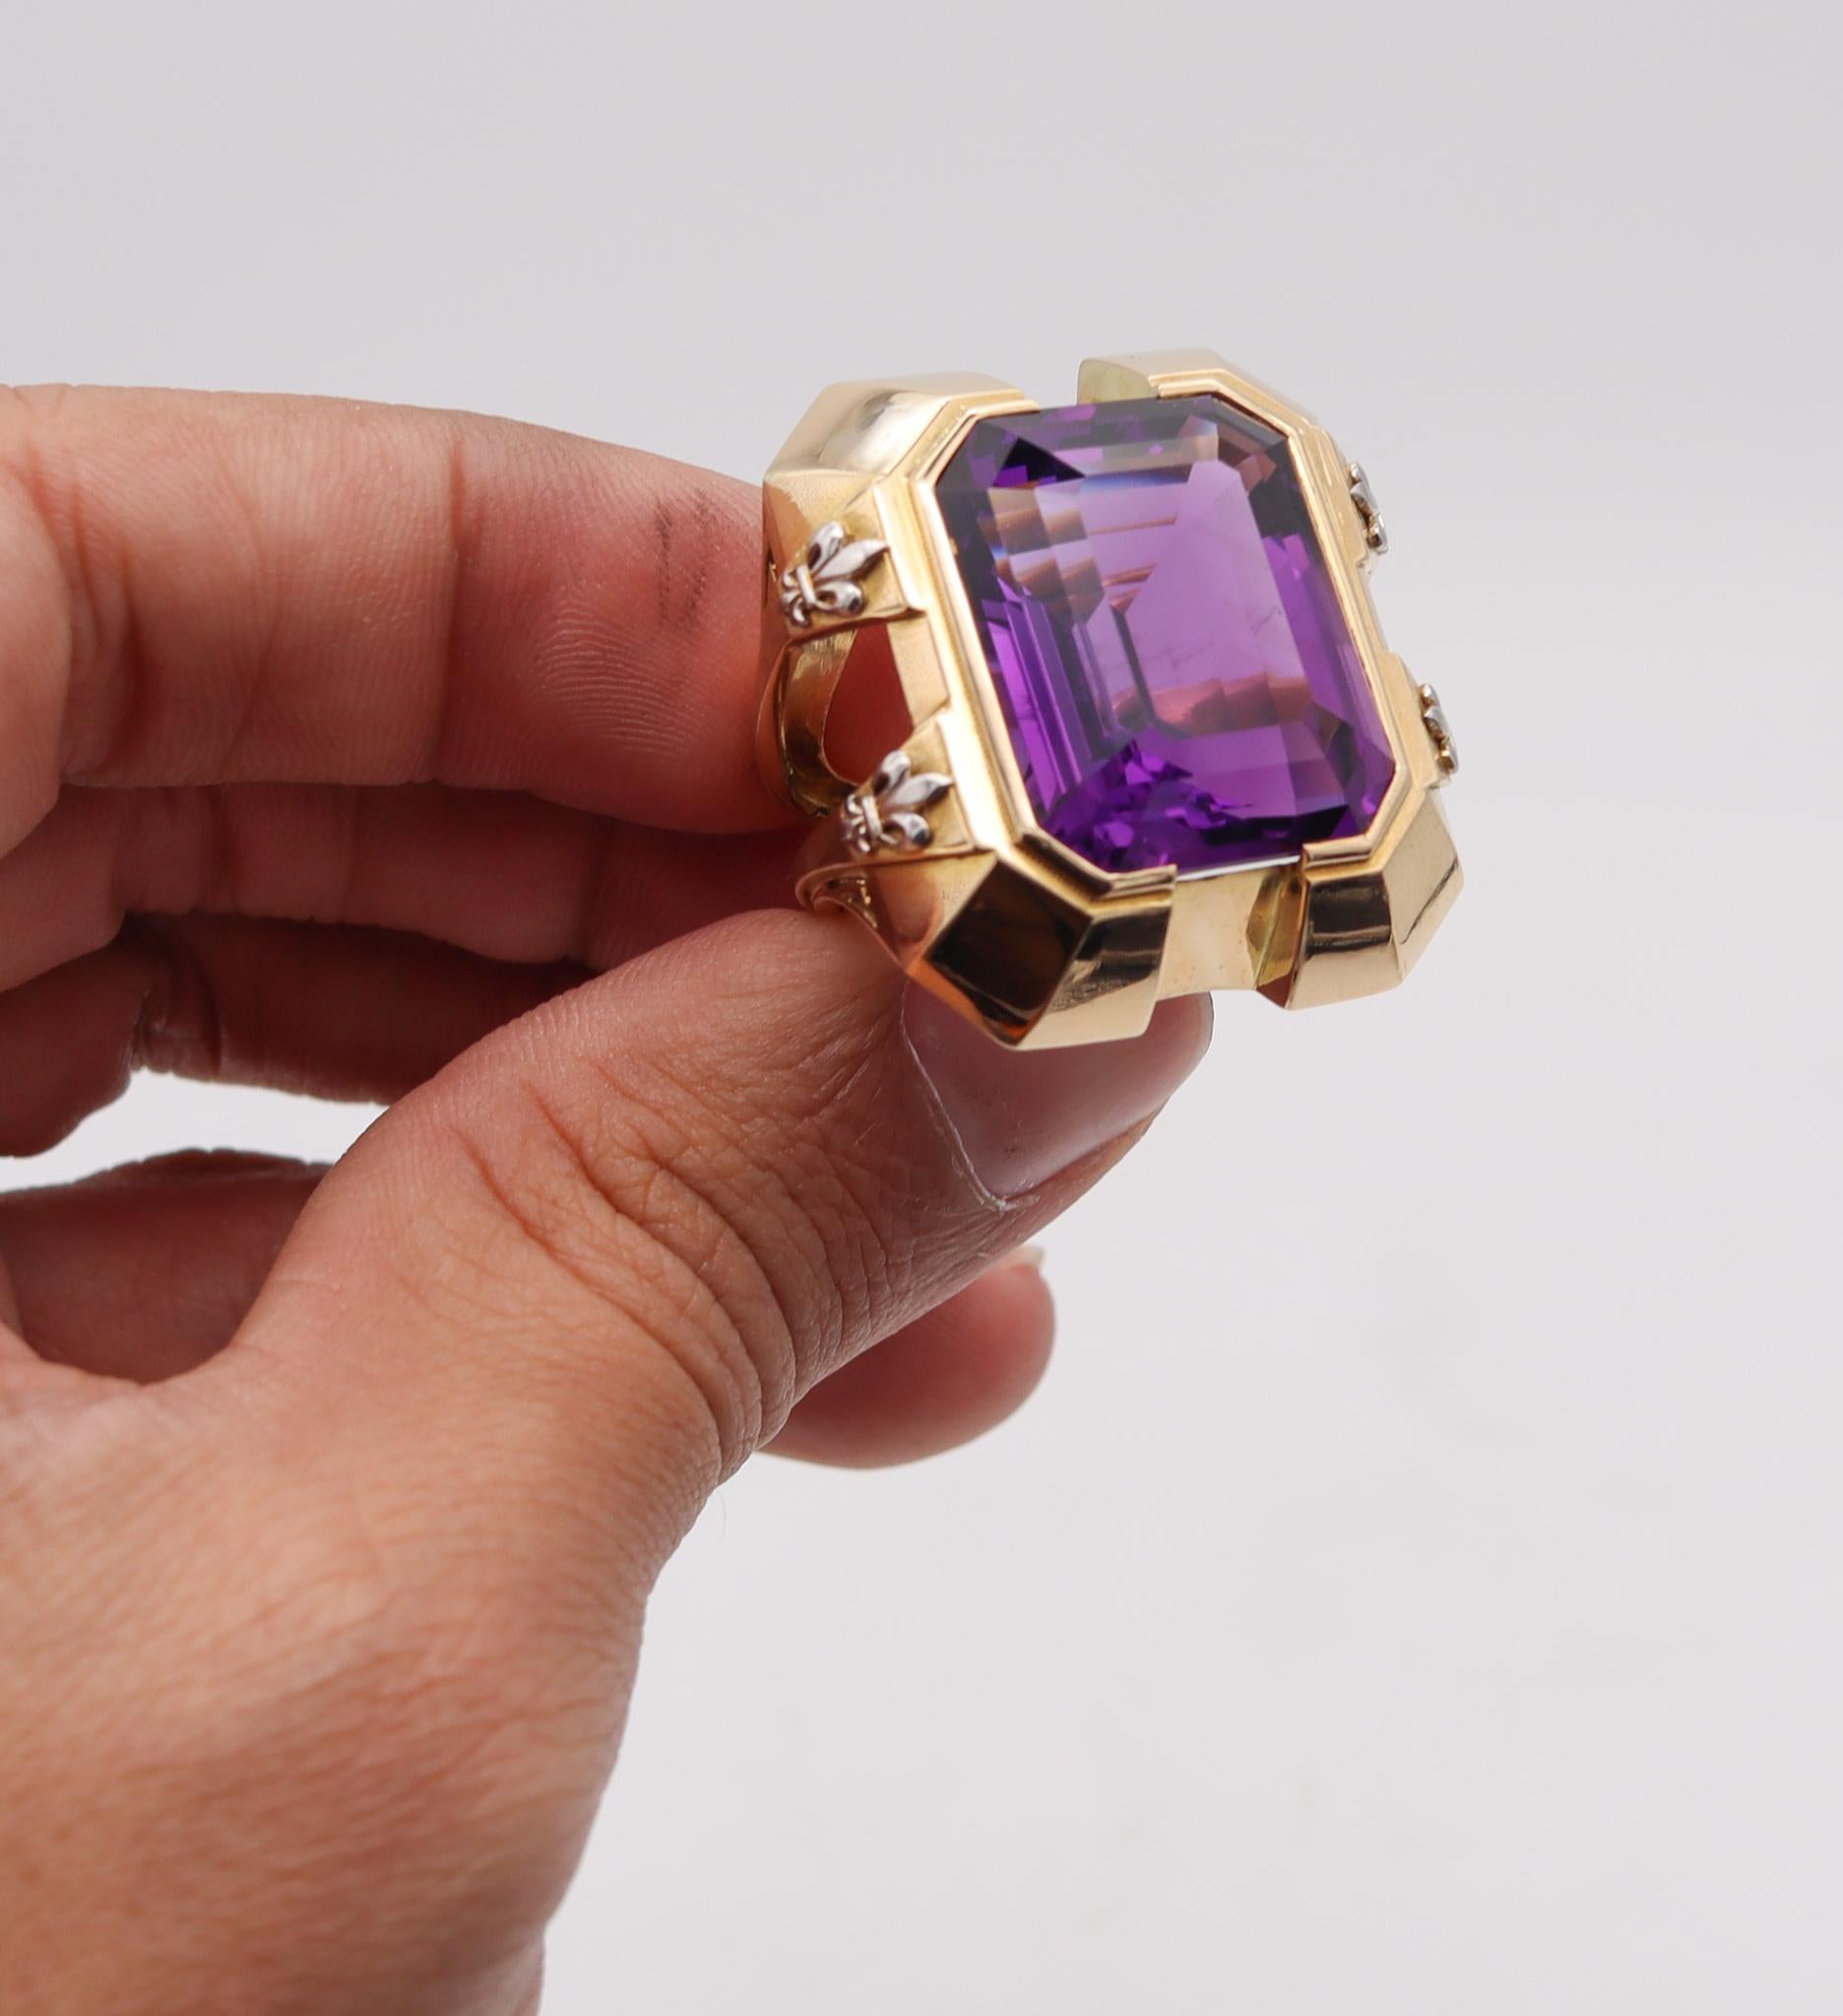 Women's or Men's Marchak Paris 1930 Art Deco Geometric Ring In 18Kt Gold With 42.84 Cts Amethyst For Sale